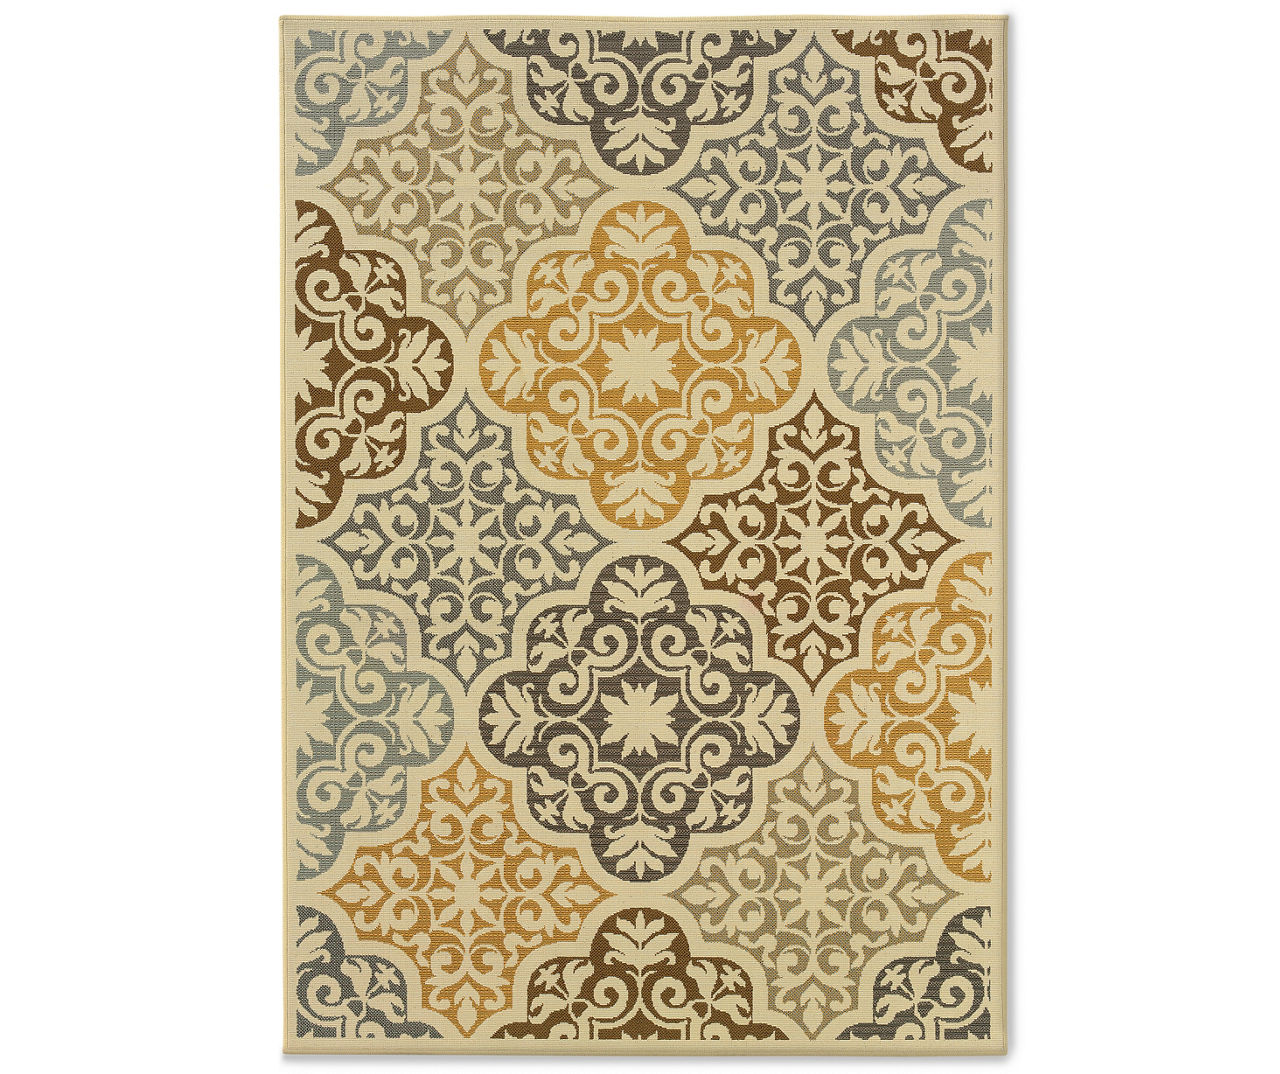 Gaines Warm White Outdoor Area Rug, (5'3" x 7'6")